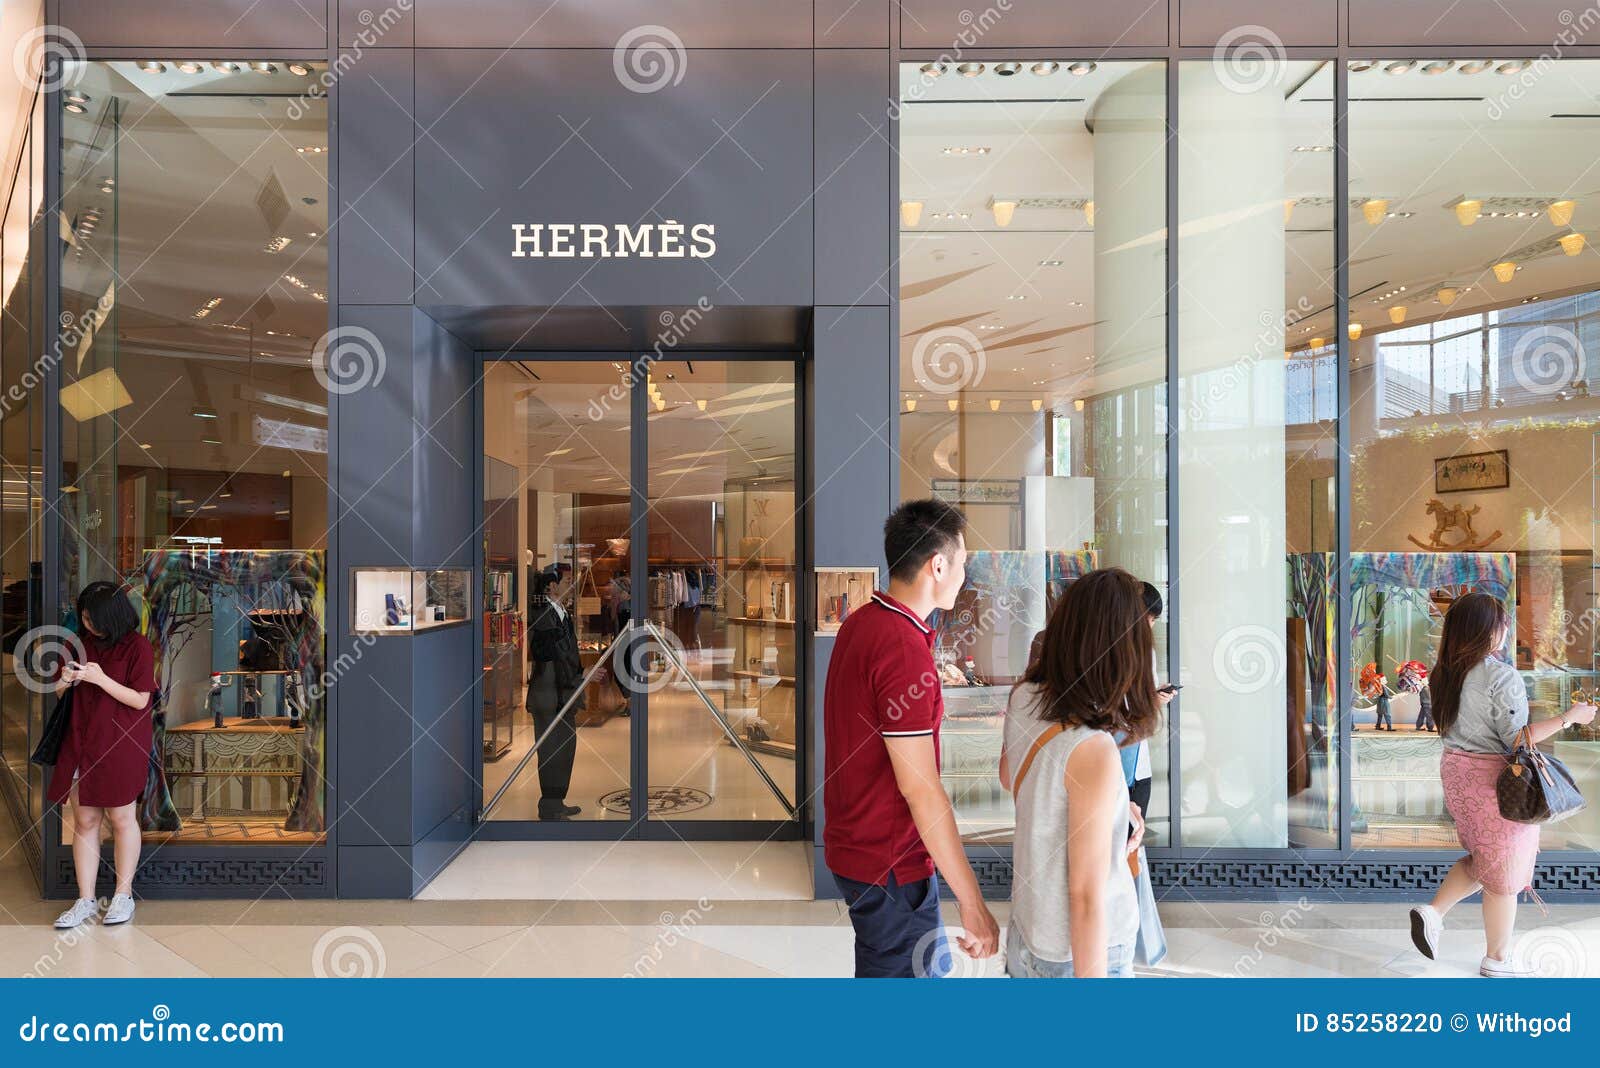 Hermes Store At Siam Paragon Mall 